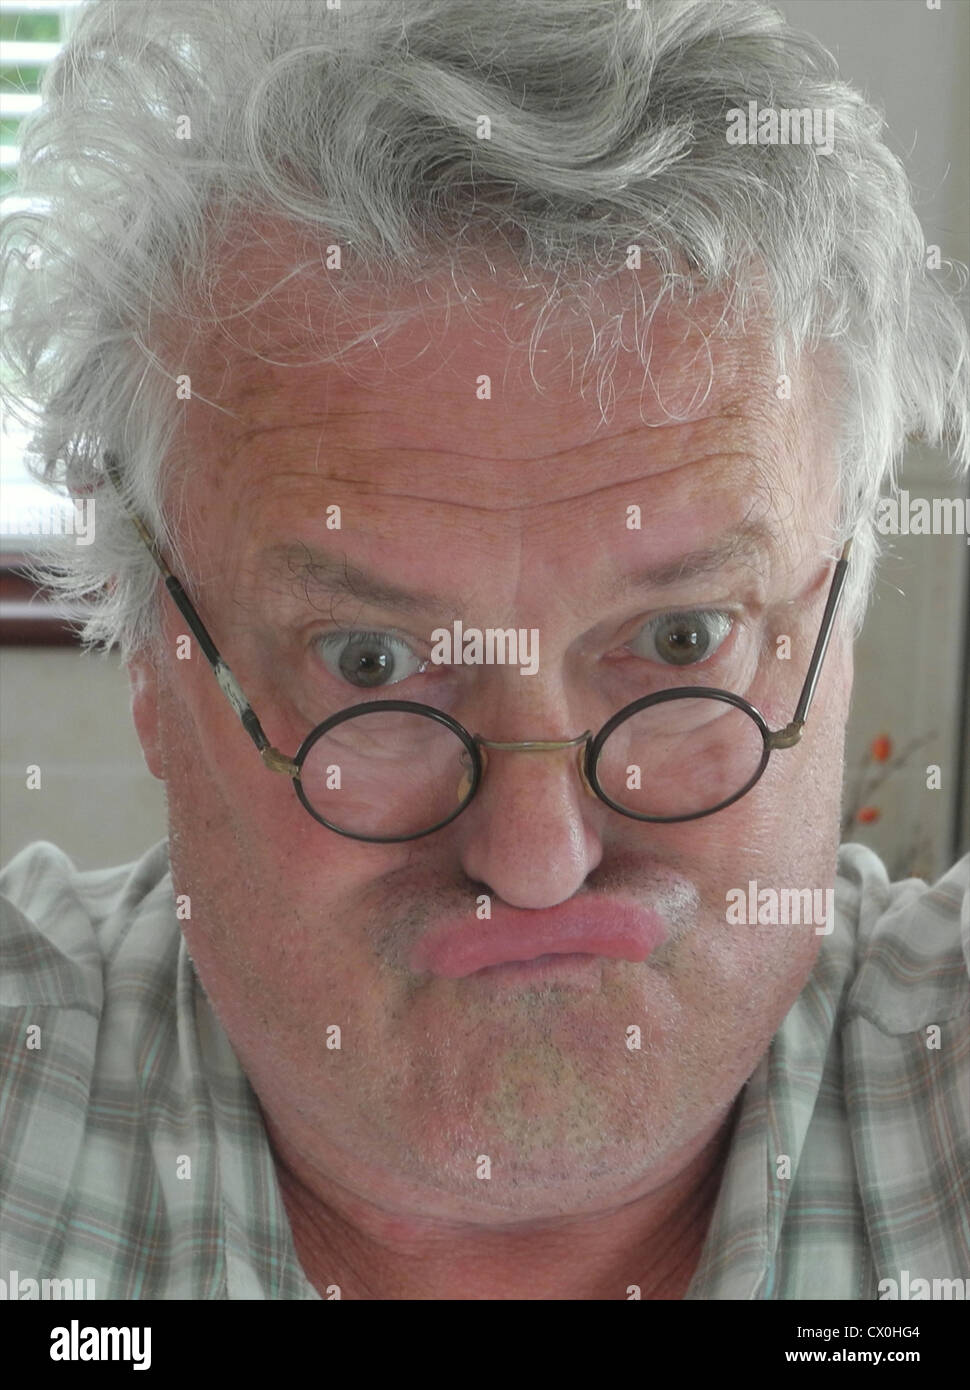 An ugly grumpy old man - fully model released images for any use Stock Photo